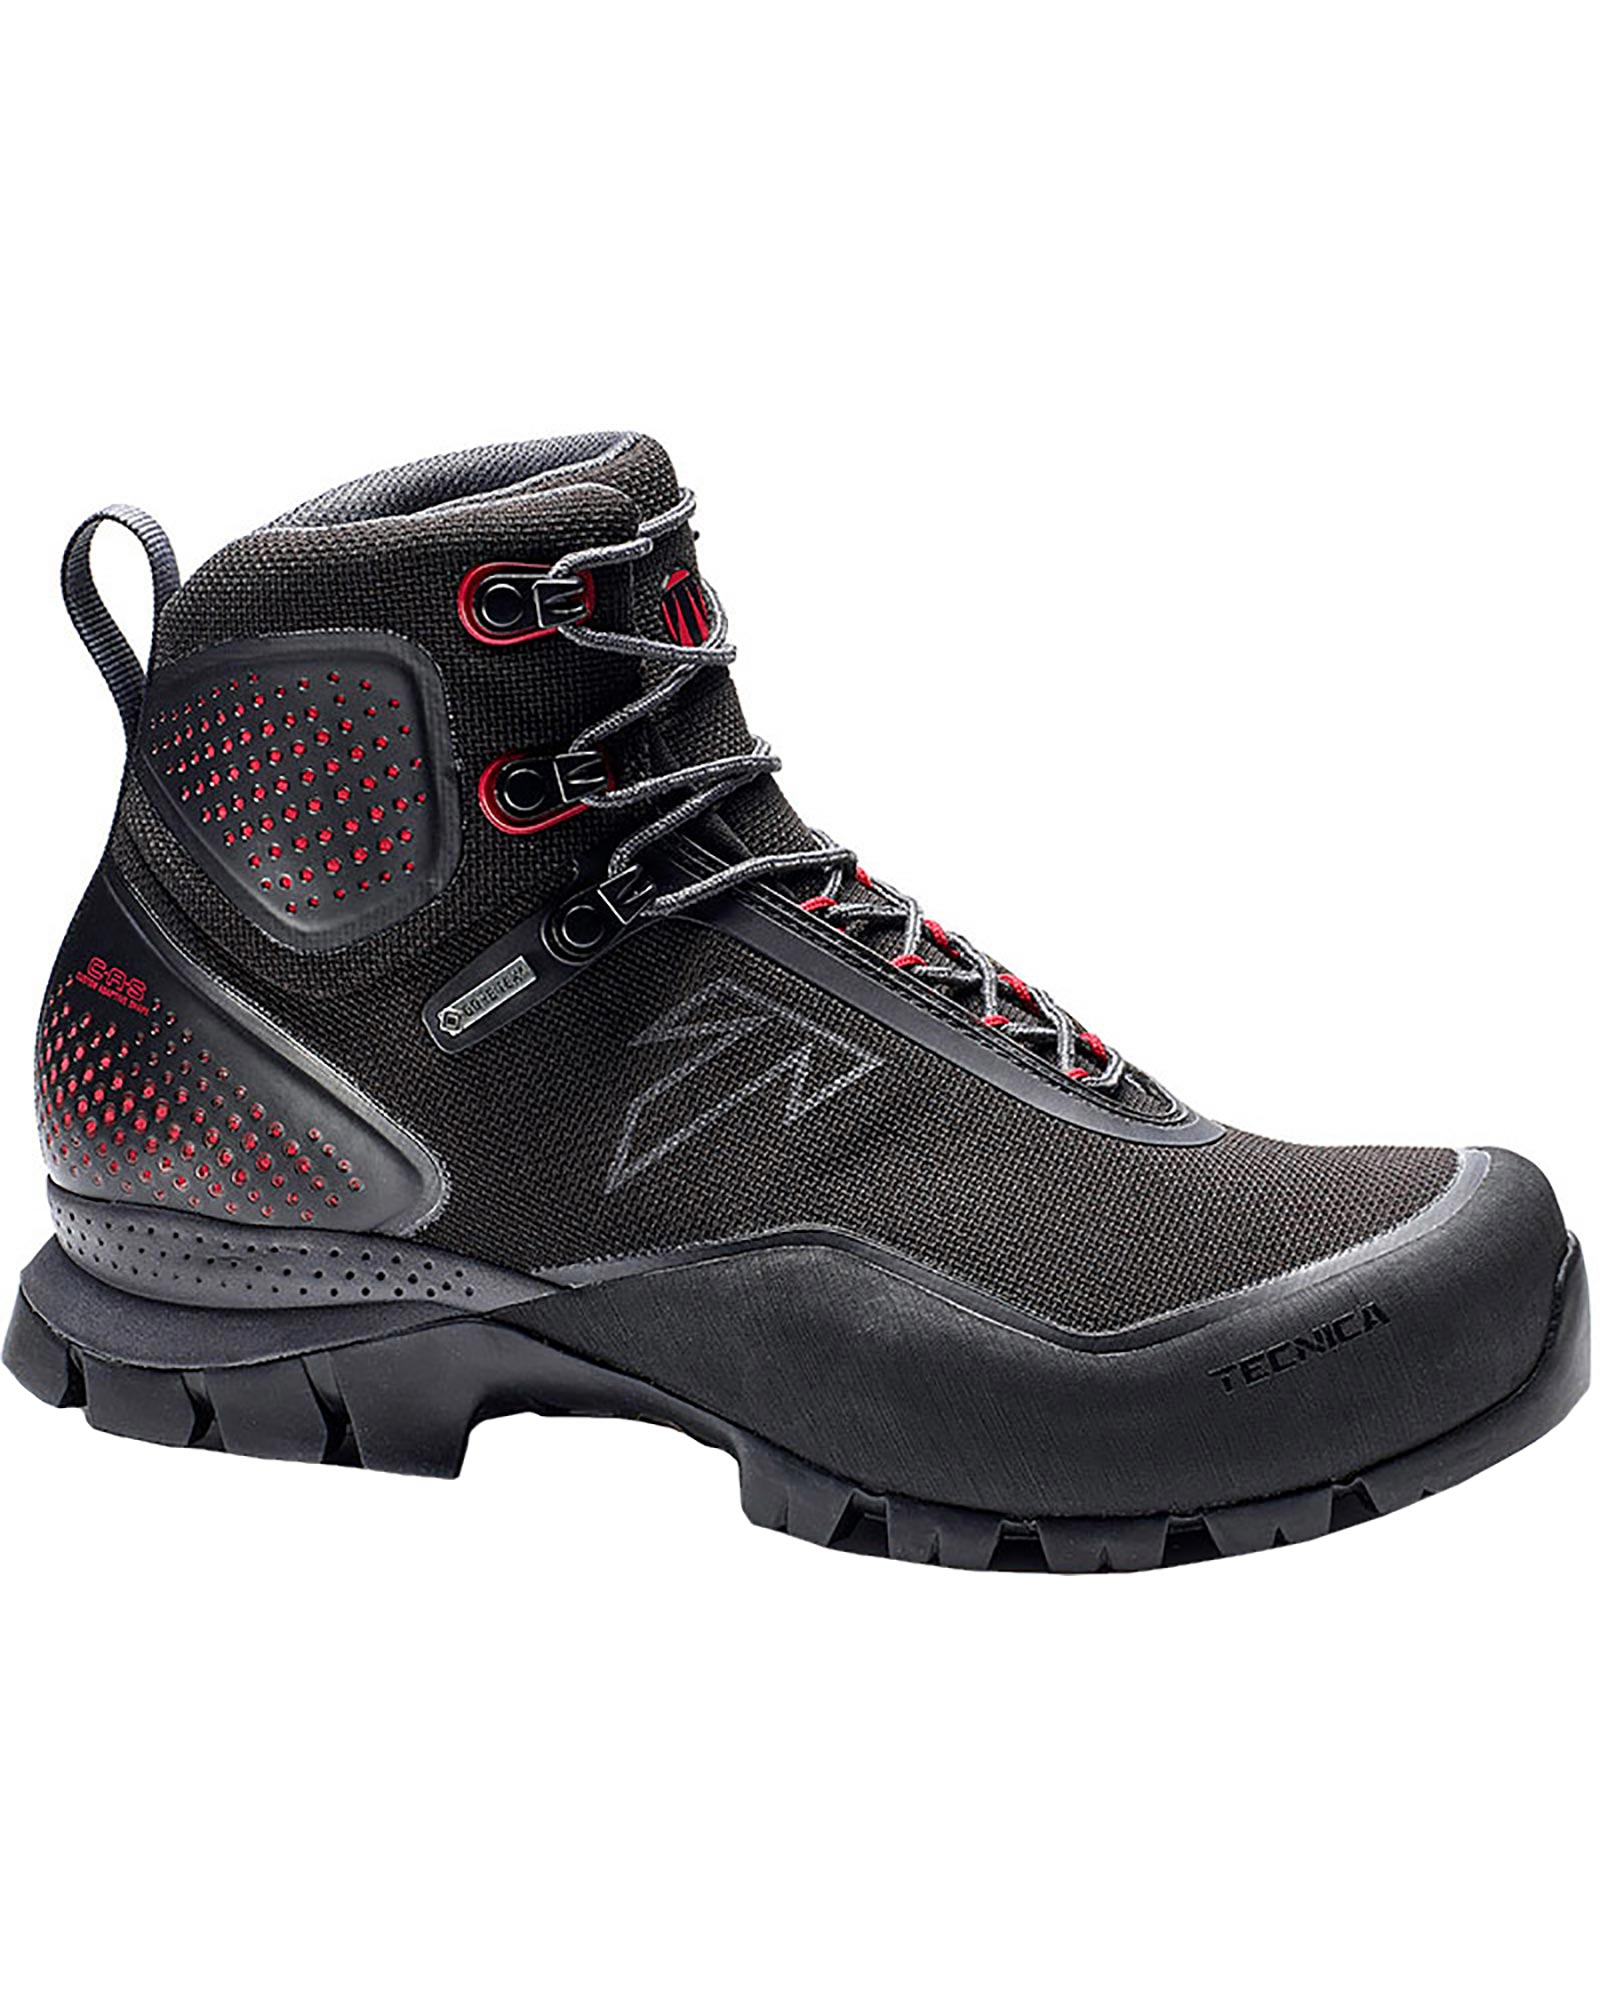 Tecnica Forge S Gore-tex Womens Boots